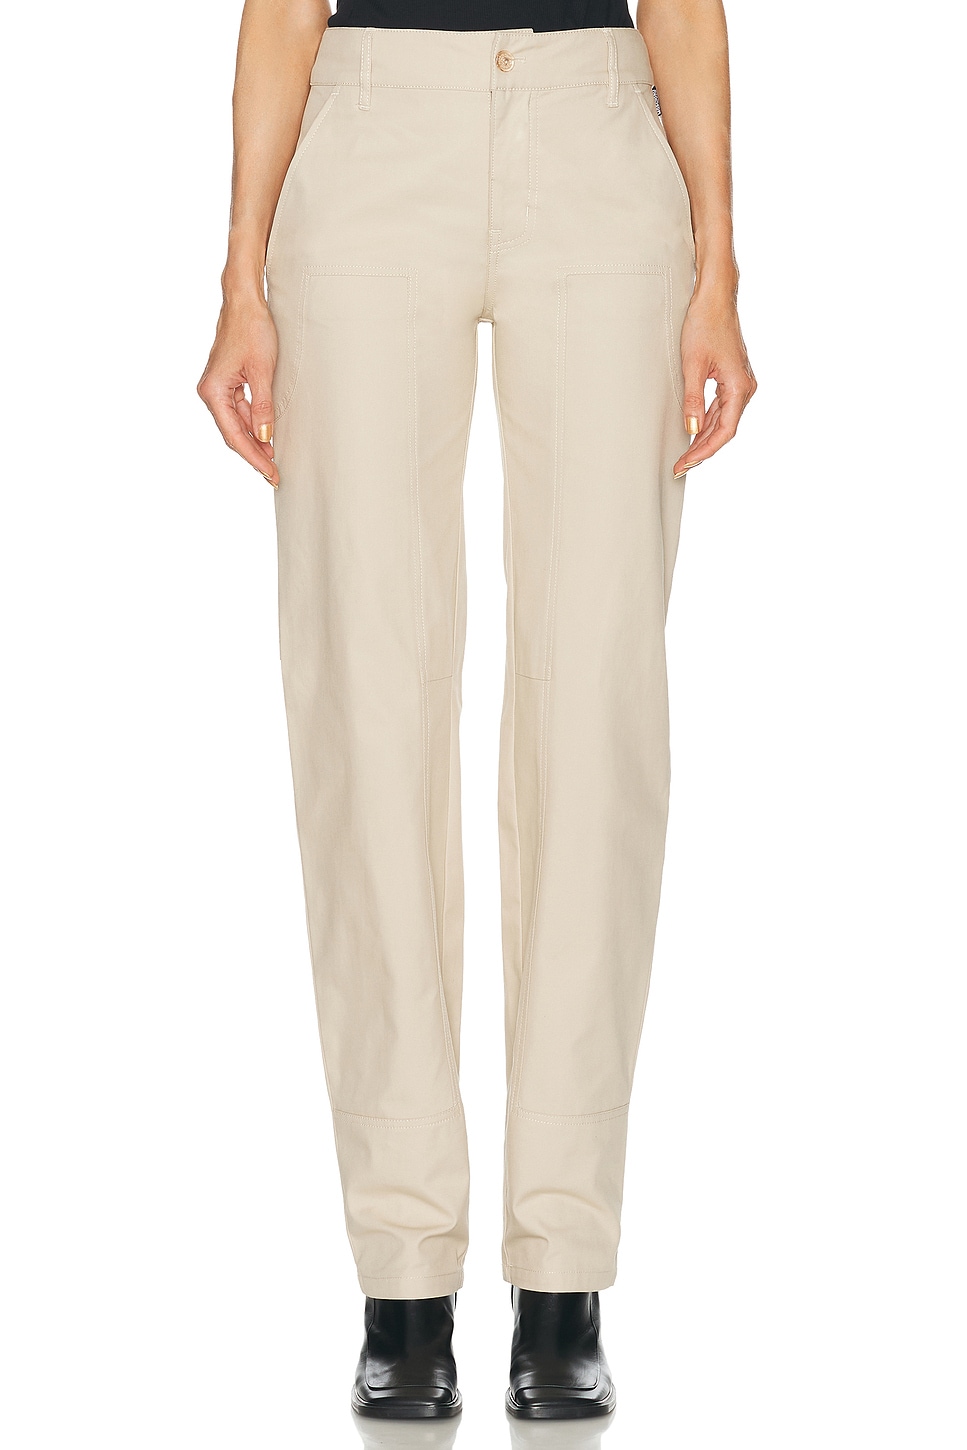 Image 1 of Moschino Jeans Tailored Pant in Beige